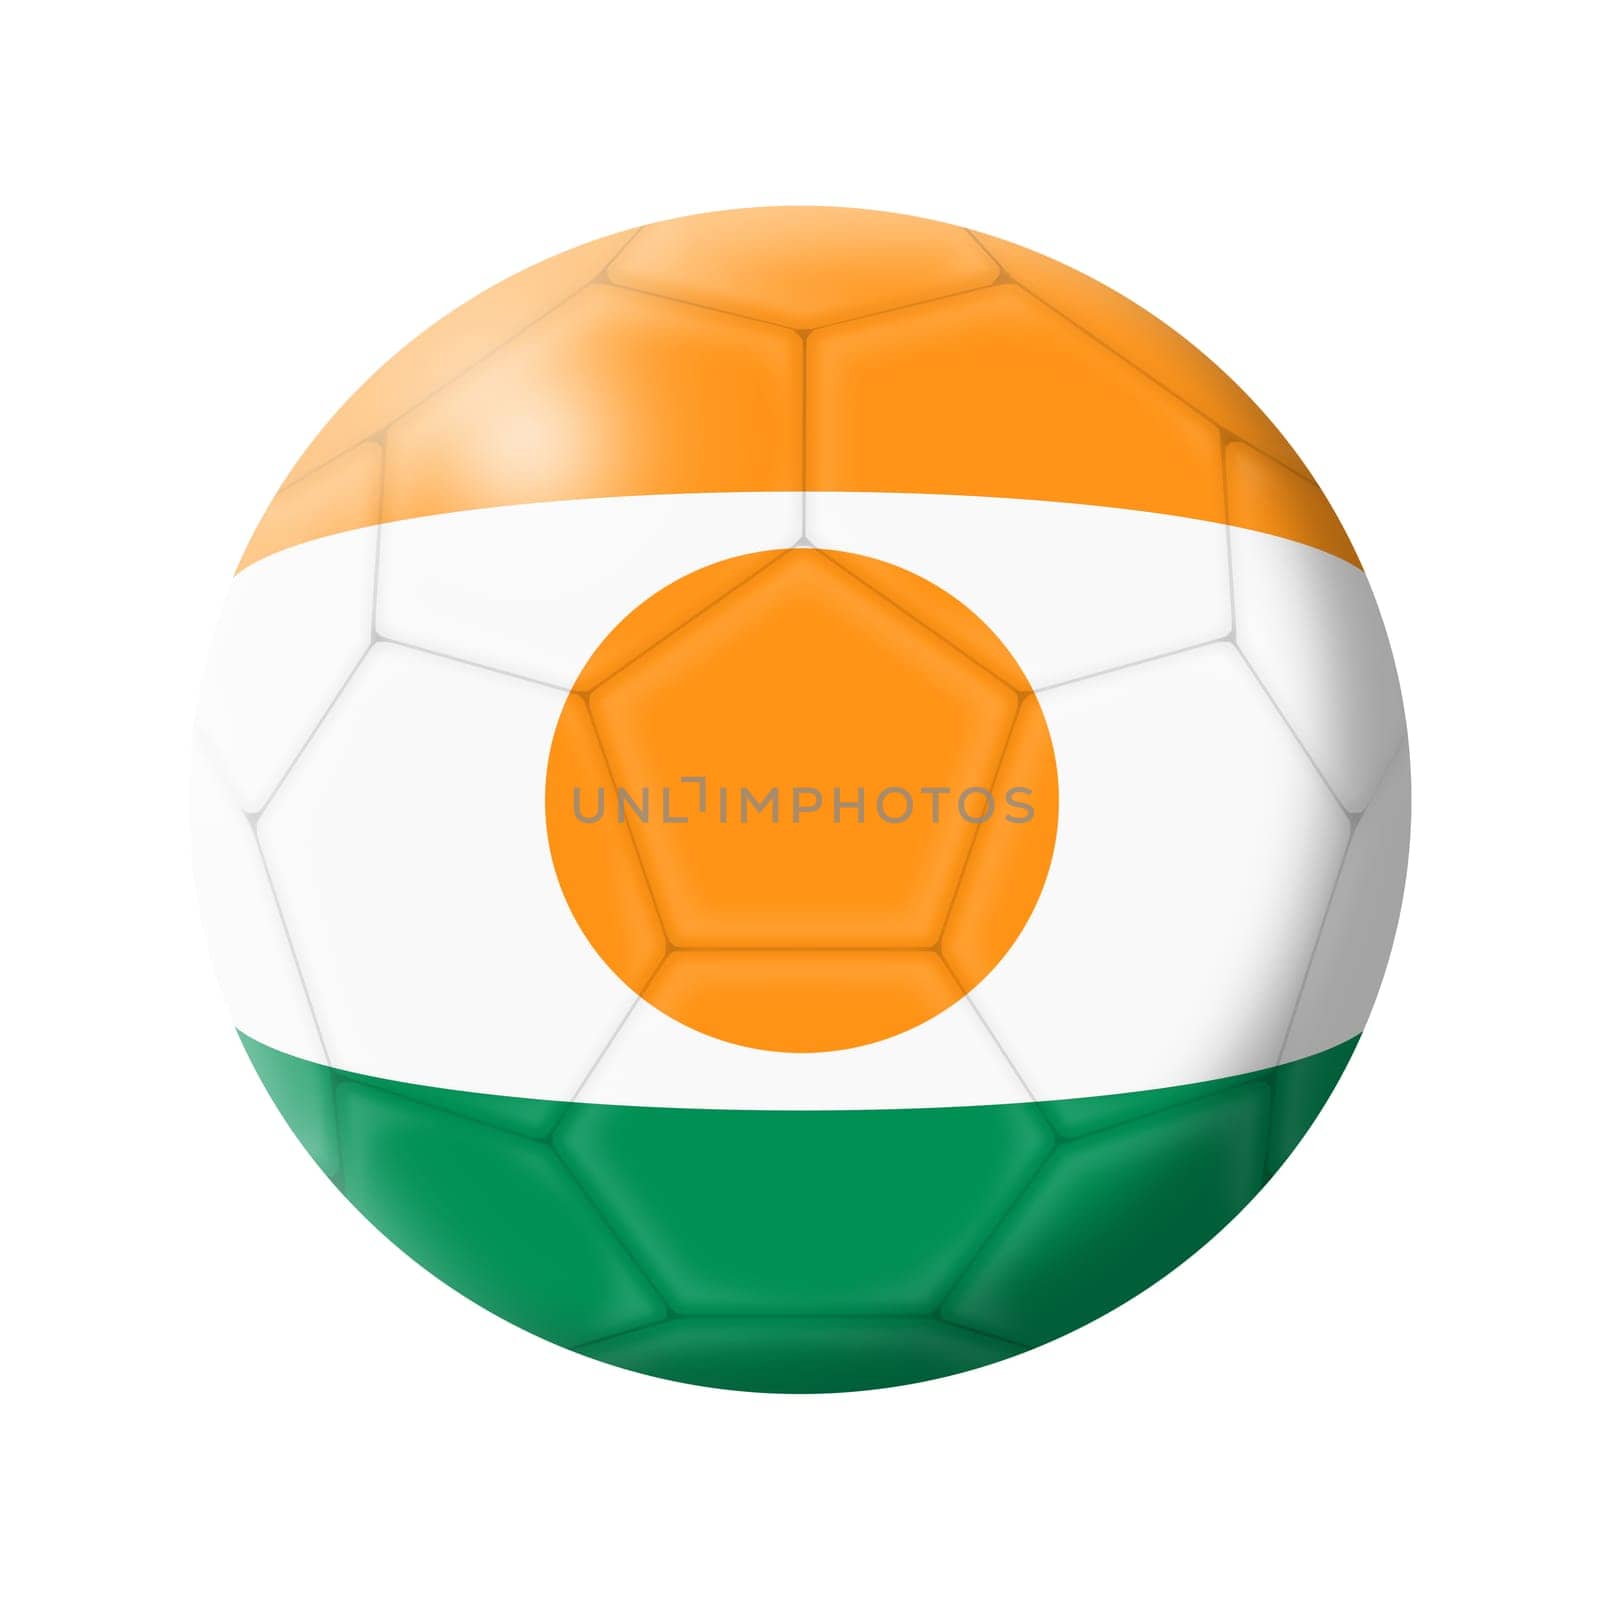 A Niger soccer ball football 3d illustration isolated on white with clipping path